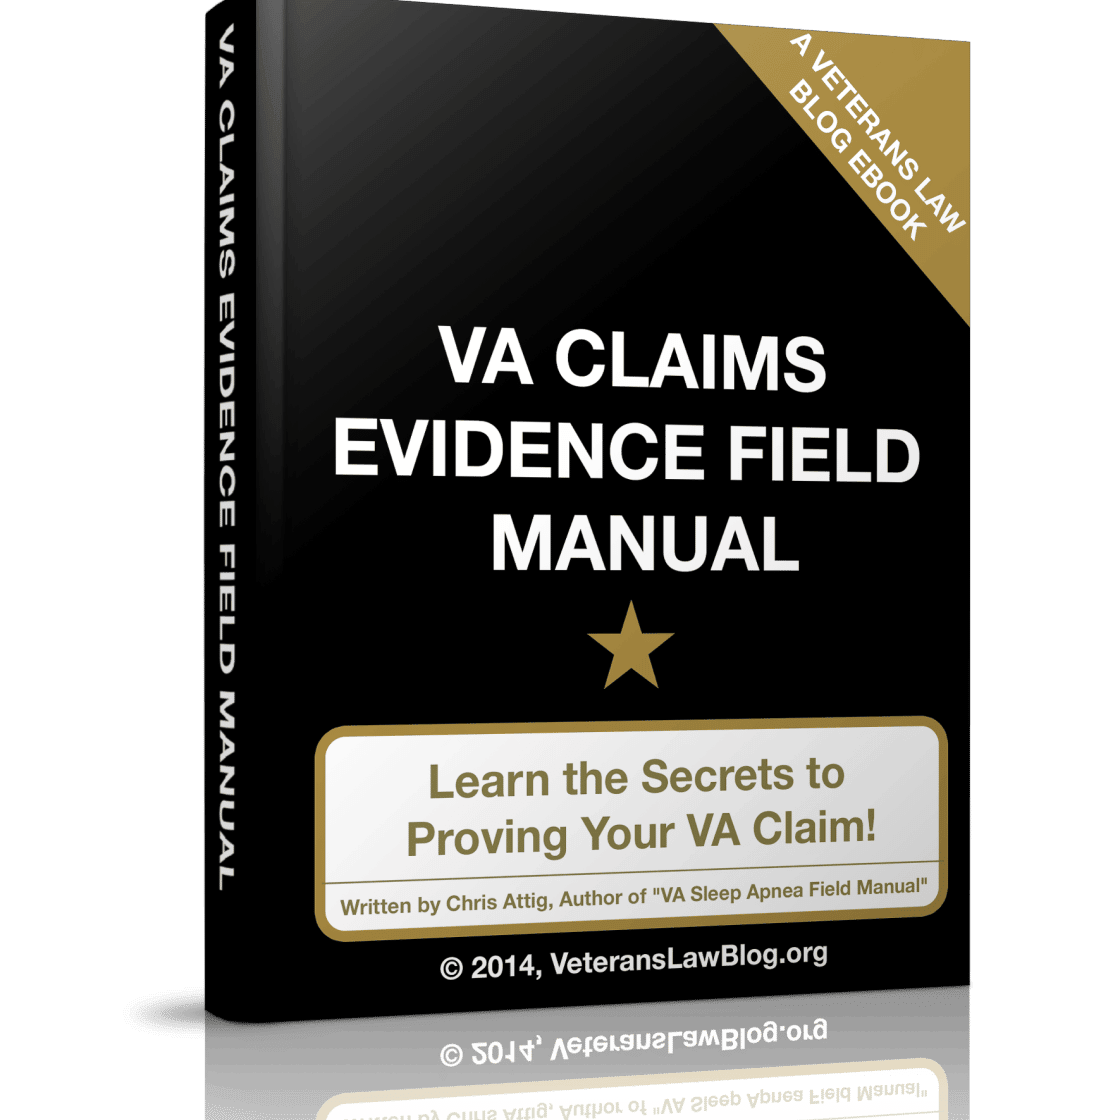  How To Claim Ptsd With The Va